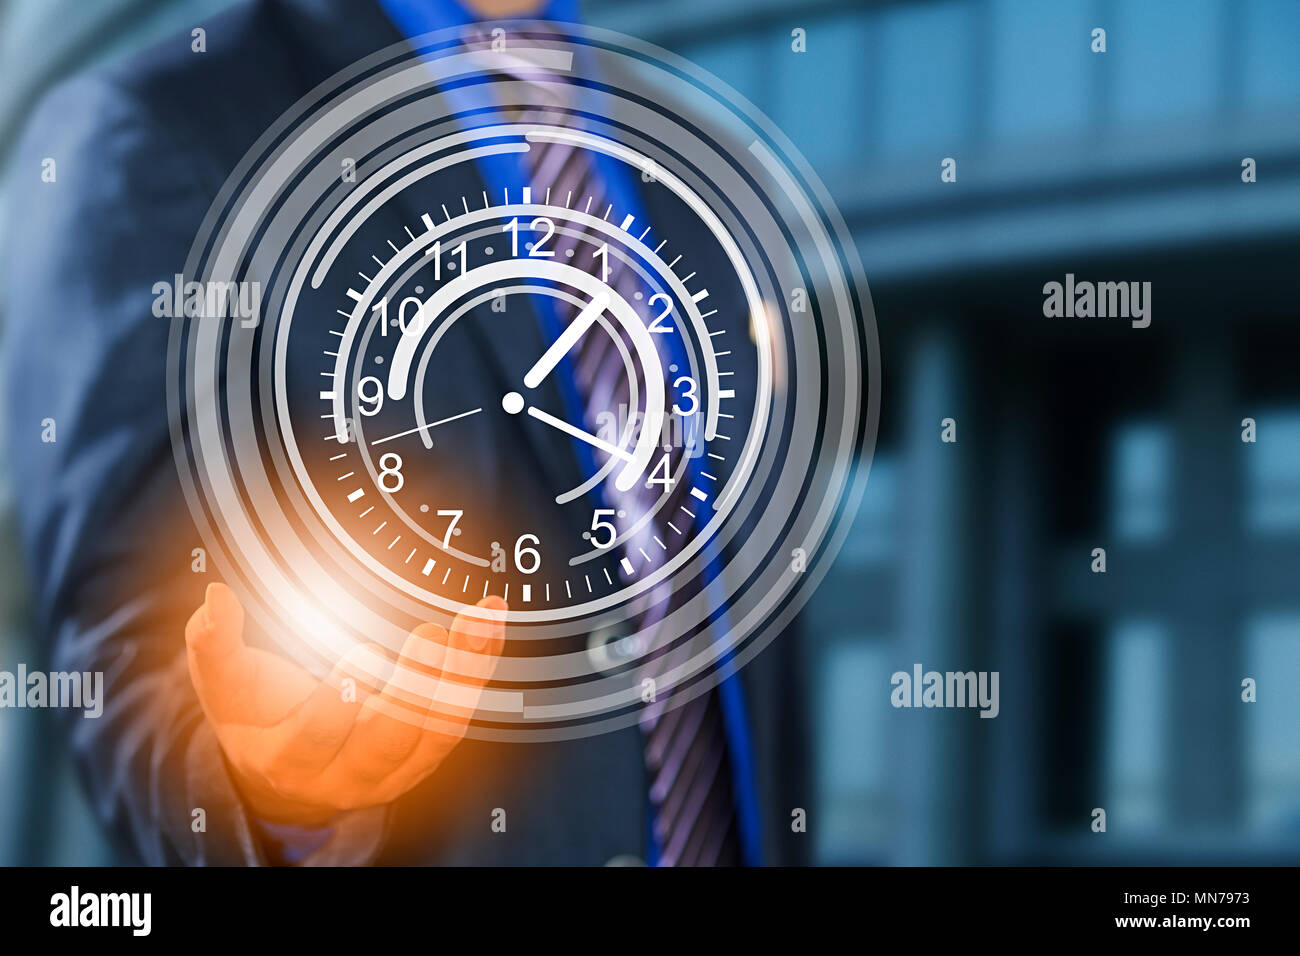 1 Business Male Digital Screen Showing Clock Time Technology Illustration Stock Photo